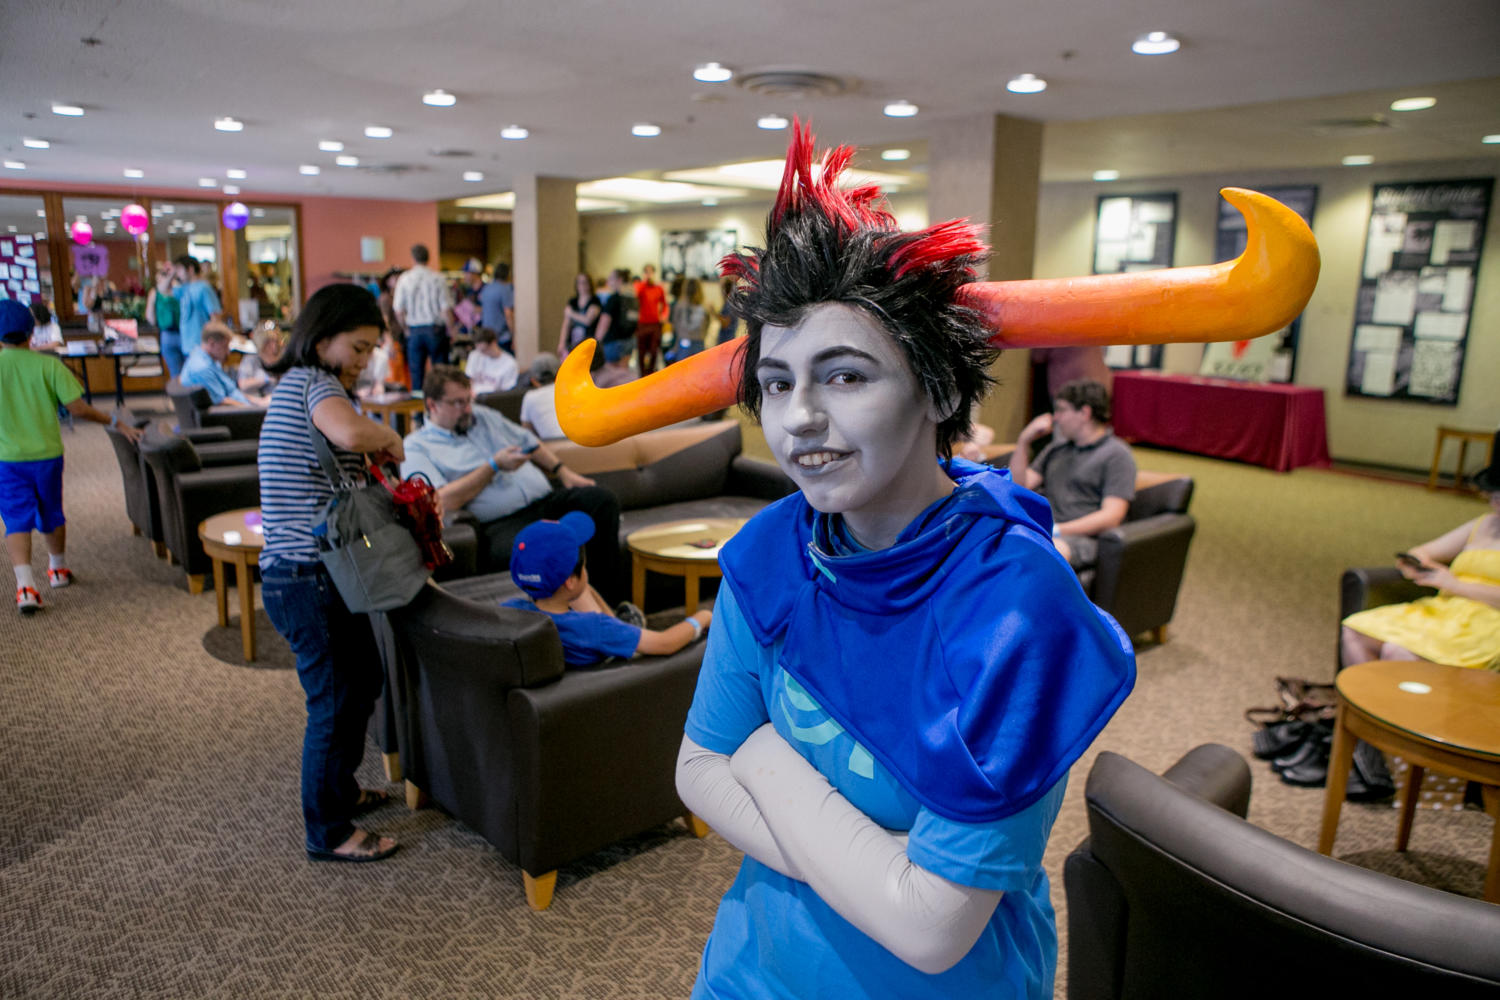 Junior zoology major, Katie Reis, of Naperville poses for a portrait dressed as Rufioh from Homestuck, Saturday, Aug. 19, 2017, at the SIU Eclipse Comic-Con event in the Student Center. Ive been cosplaying for about five years, Reis said. I love being able to find new ways to make things – you learn to take ideas and change them to fit your needs. (Brian Munoz | @BrianMMunoz)